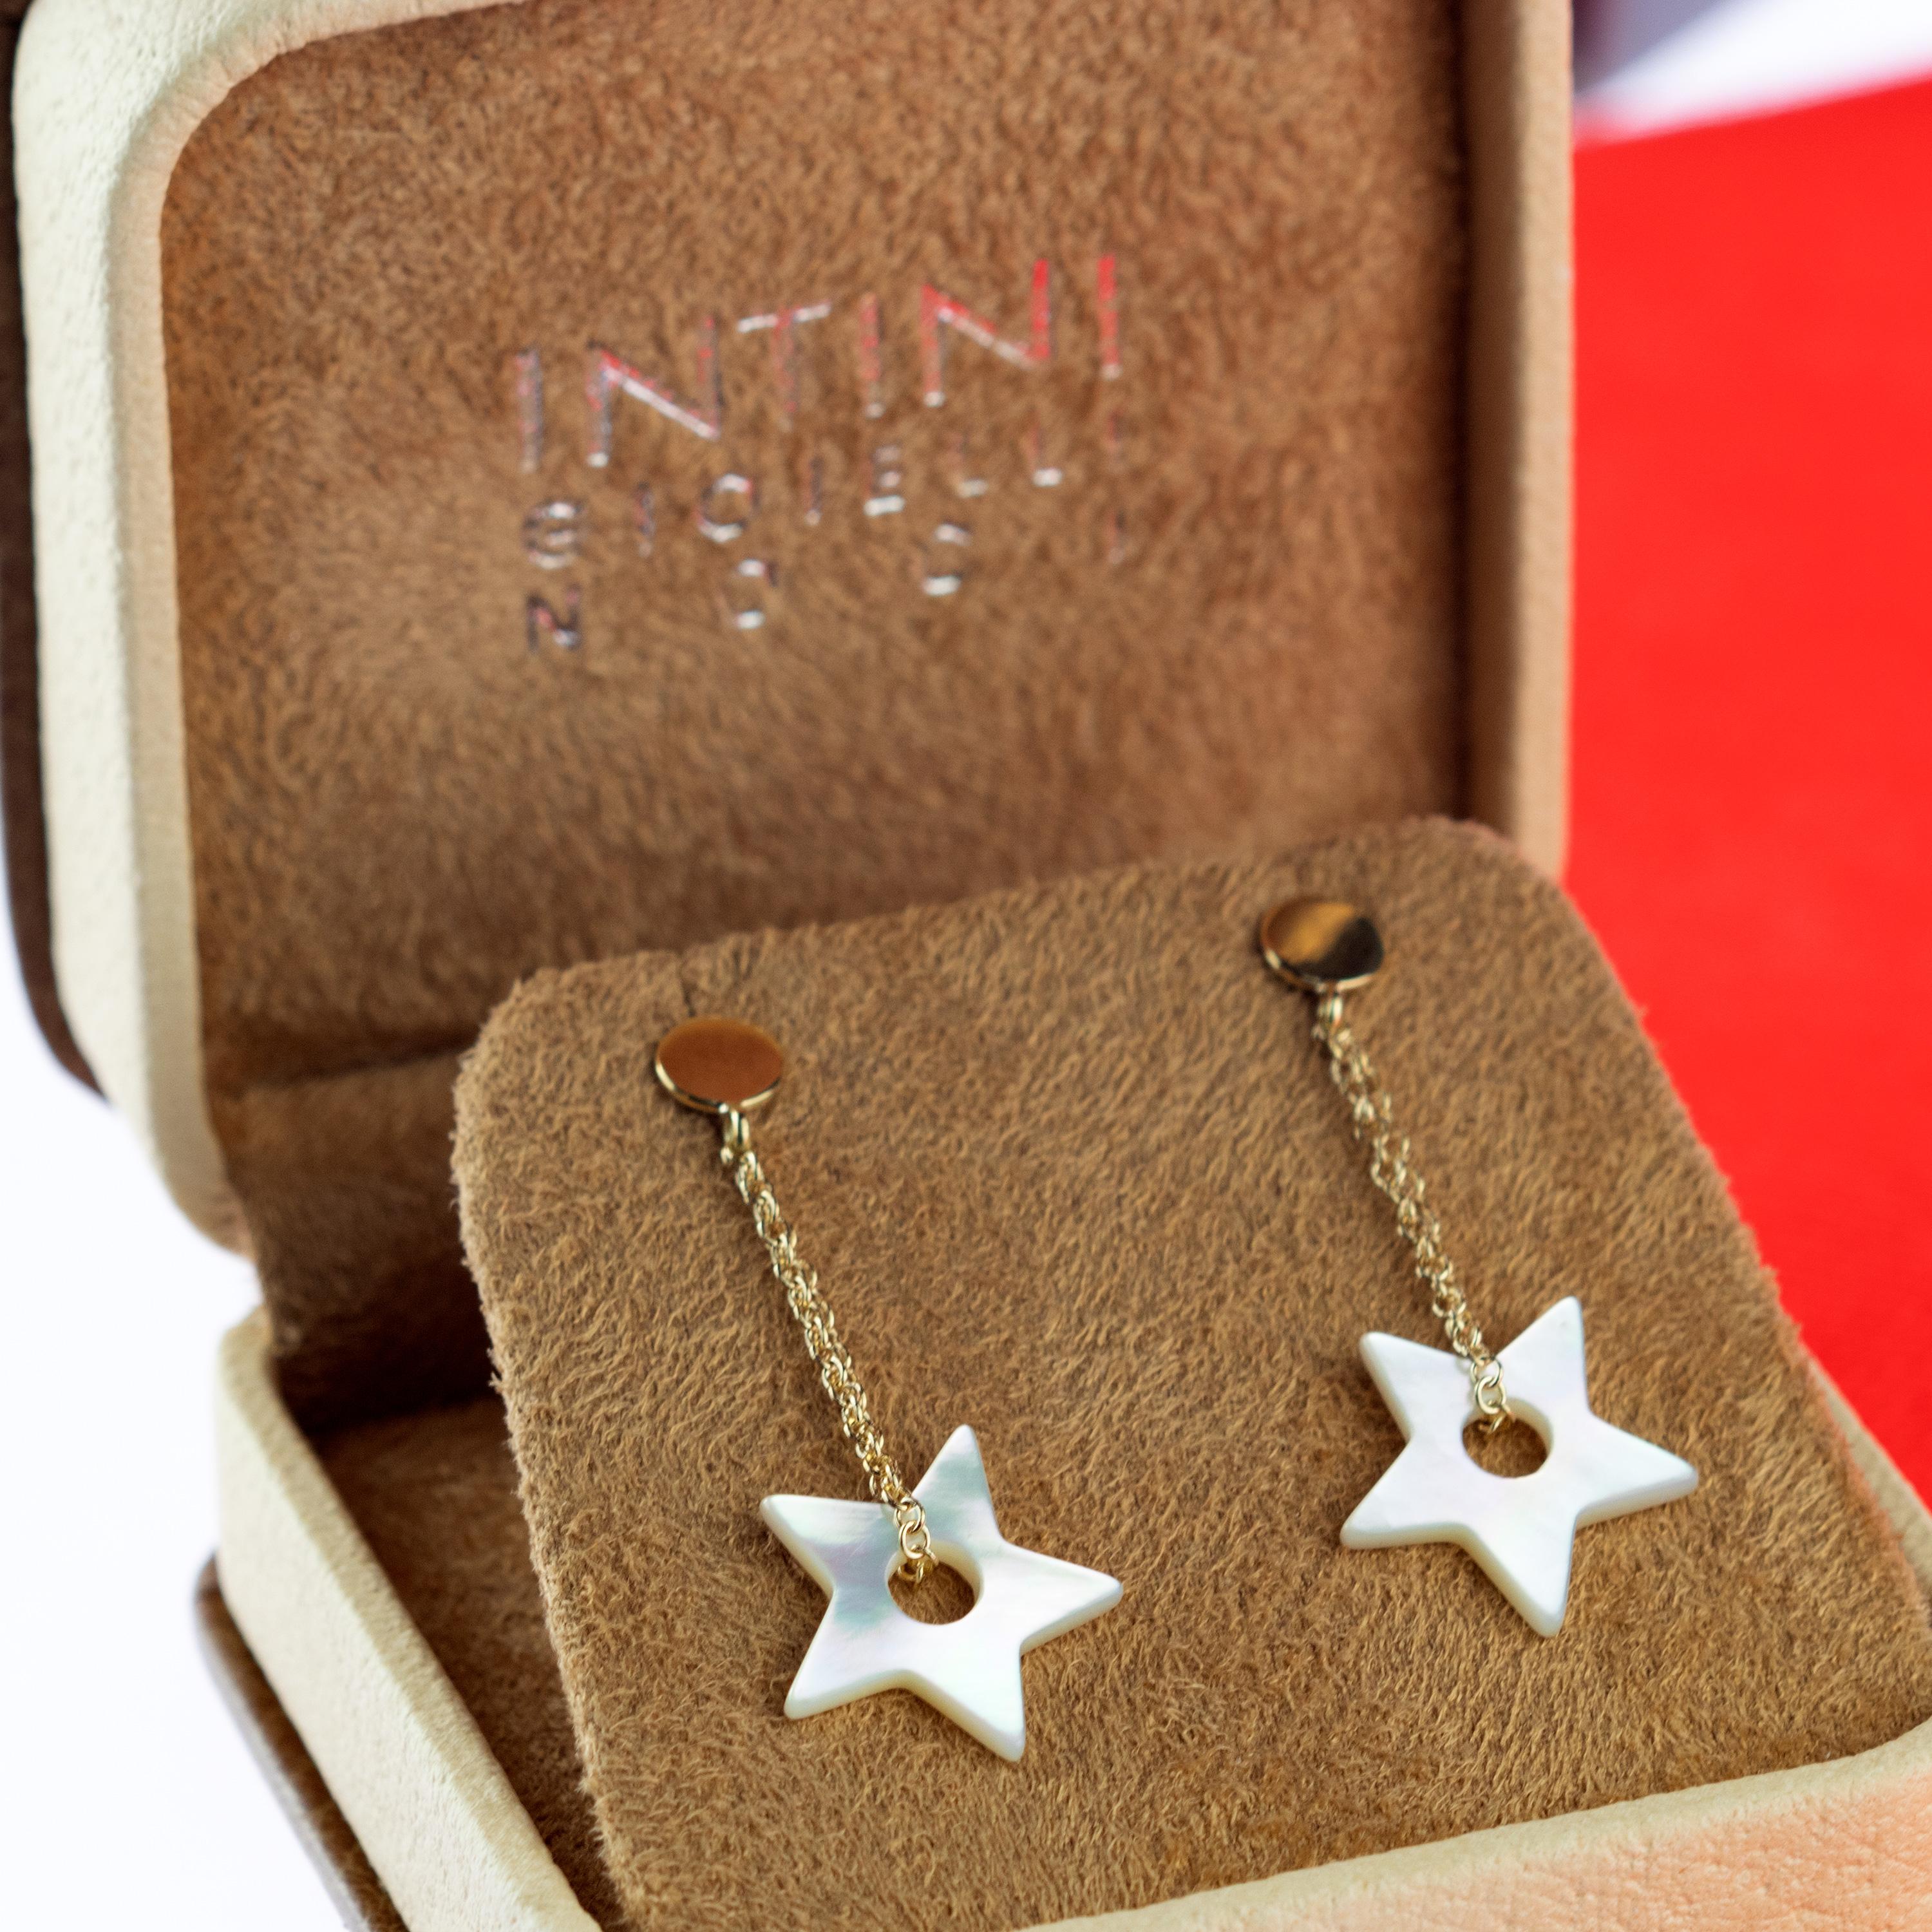 Dangle natural mother of pearl star shaped earrings with a circle hole inside, holded by 18 Karat Yellow Gold. Contemporary and unique piece designed with a modern and youthful style.

Stars have been symbolic of divine guidance and protection.